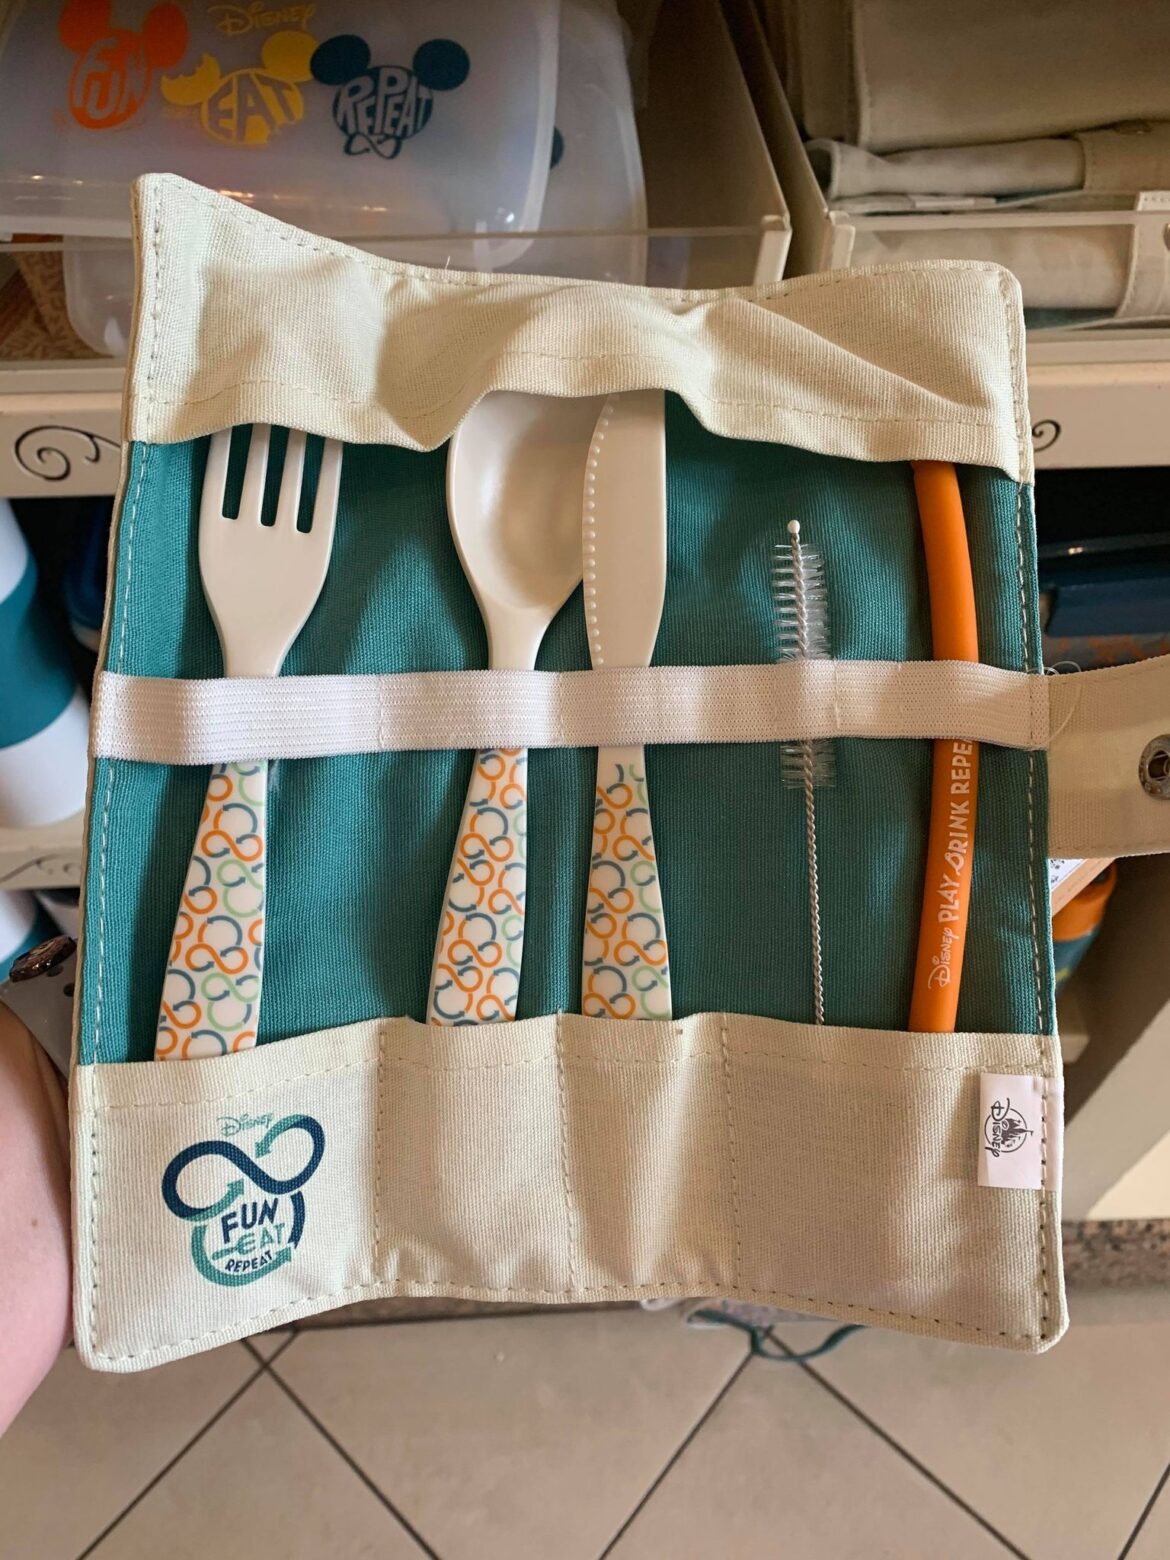 New Disney Reusable Utensils And More!